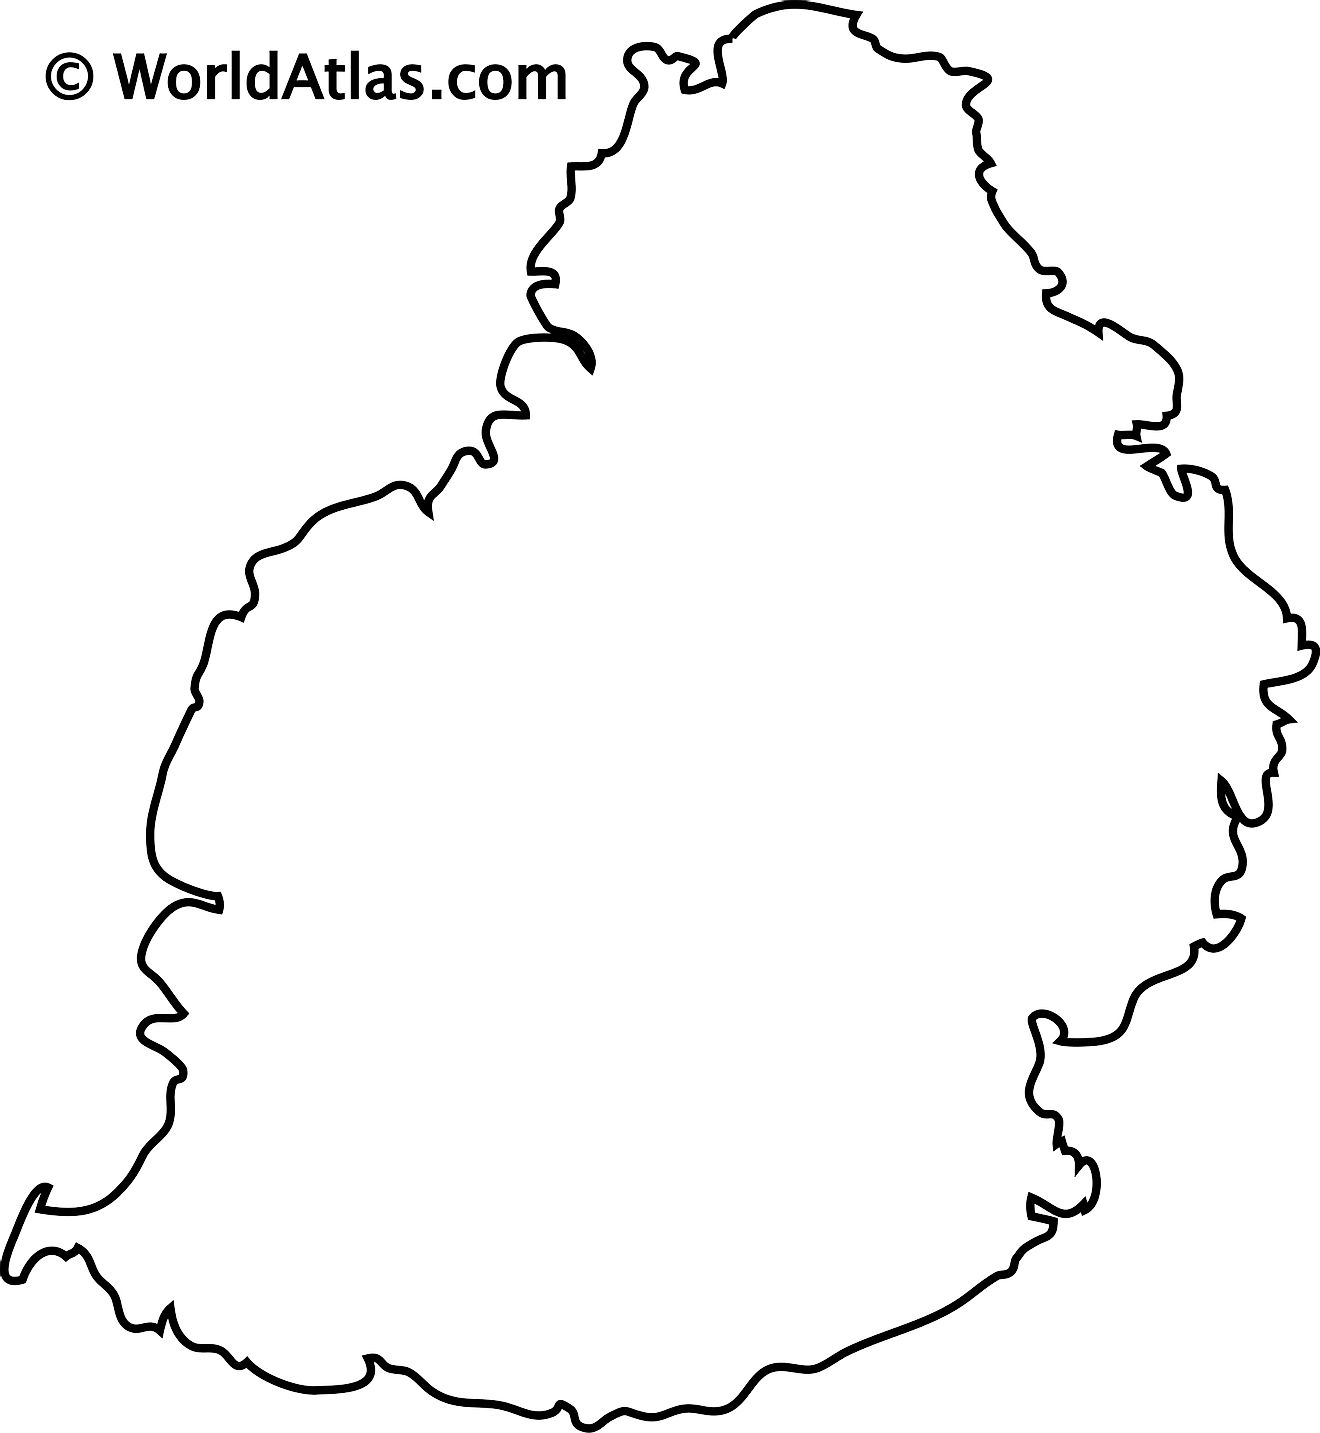 Blank Outline Map of Mauritius